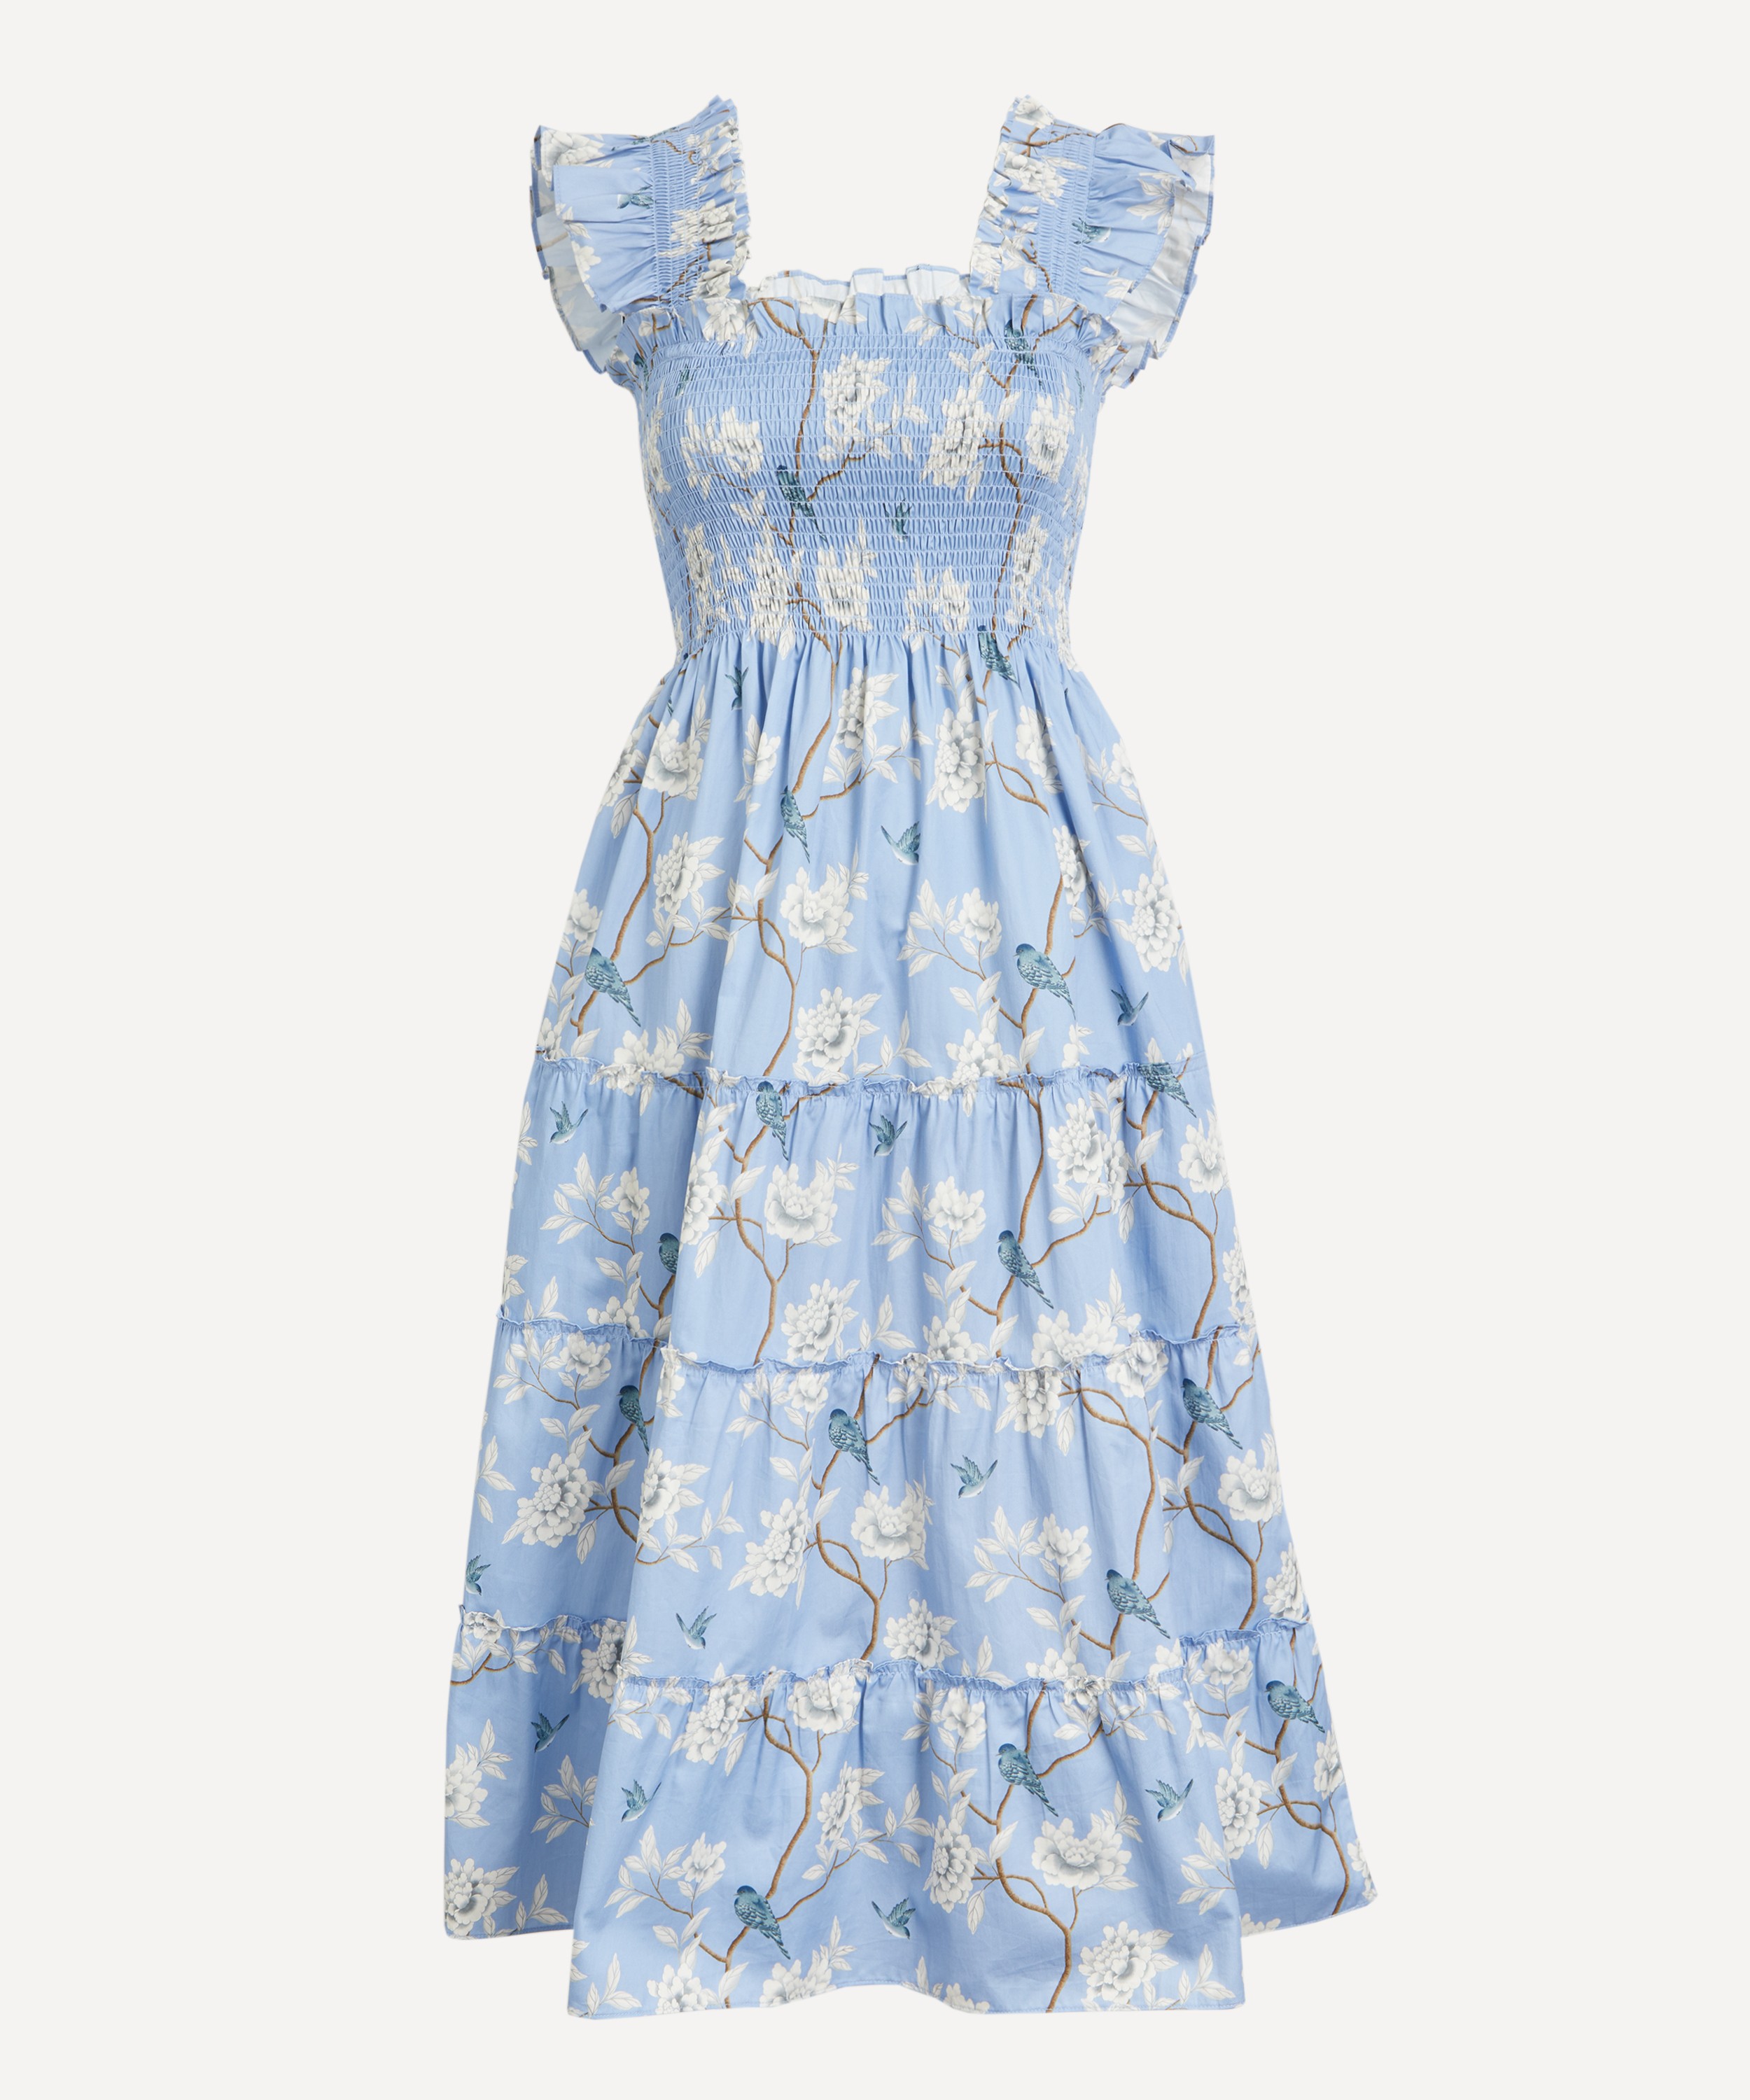 Hill House Home - Ellie Nap Dress in Diane Hill Chinoiserie